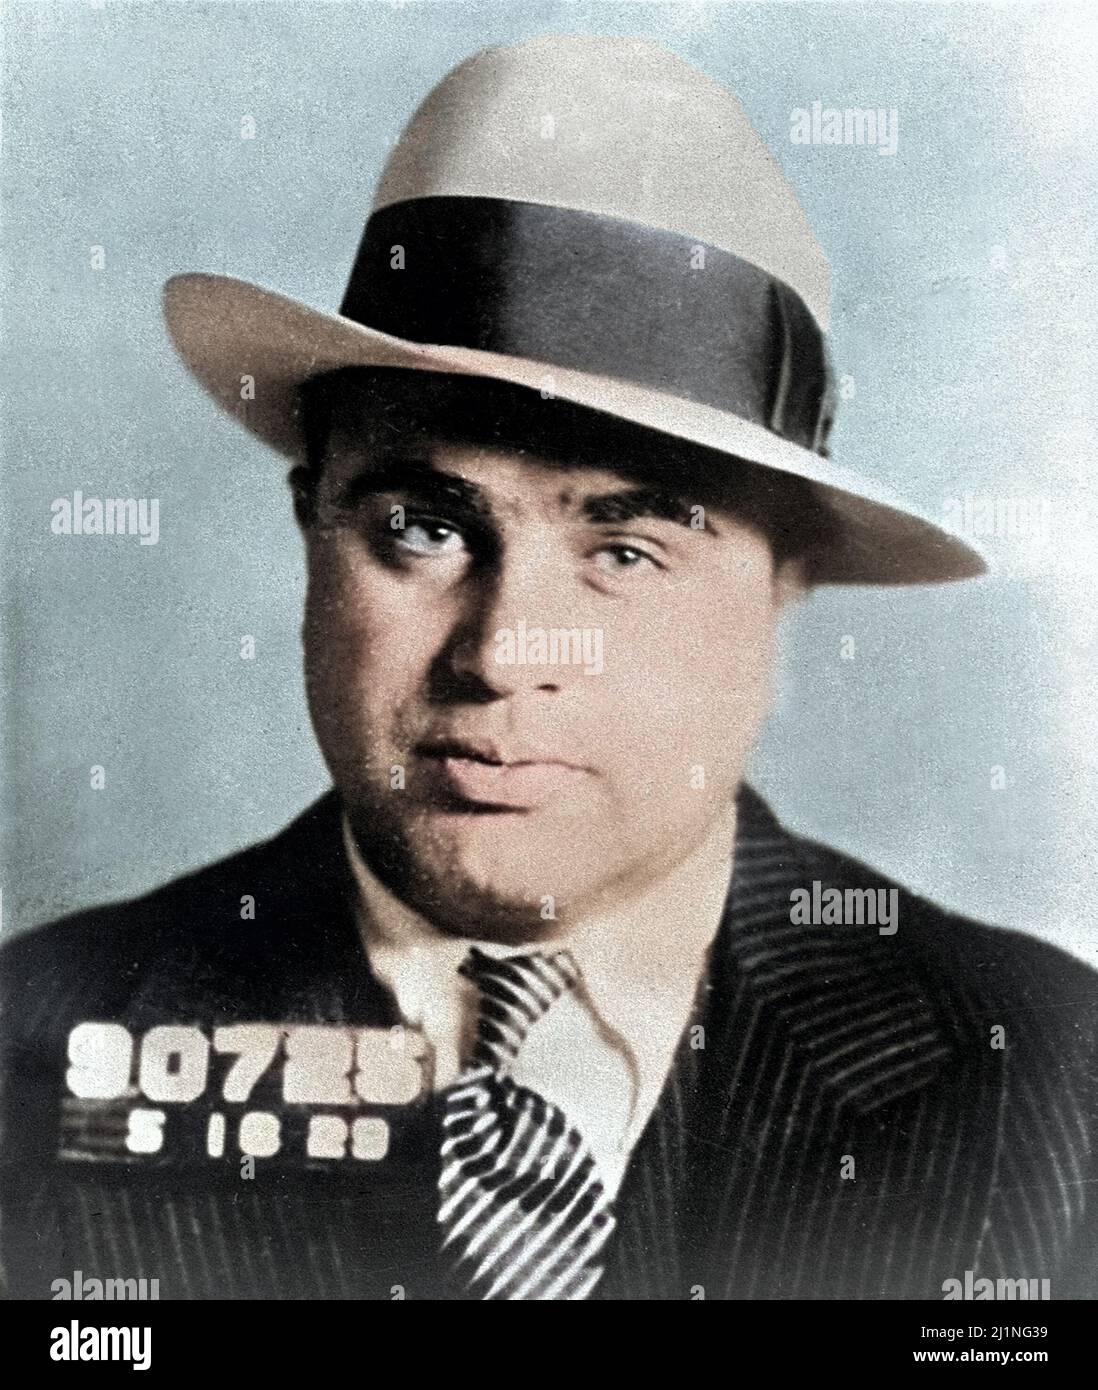 Mug shot of Al Capone in Philadelphia, Pennsylvania, where he had been arrested and charged with carrying a concealed weapon. 16 May 1929. Colorized. Stock Photo